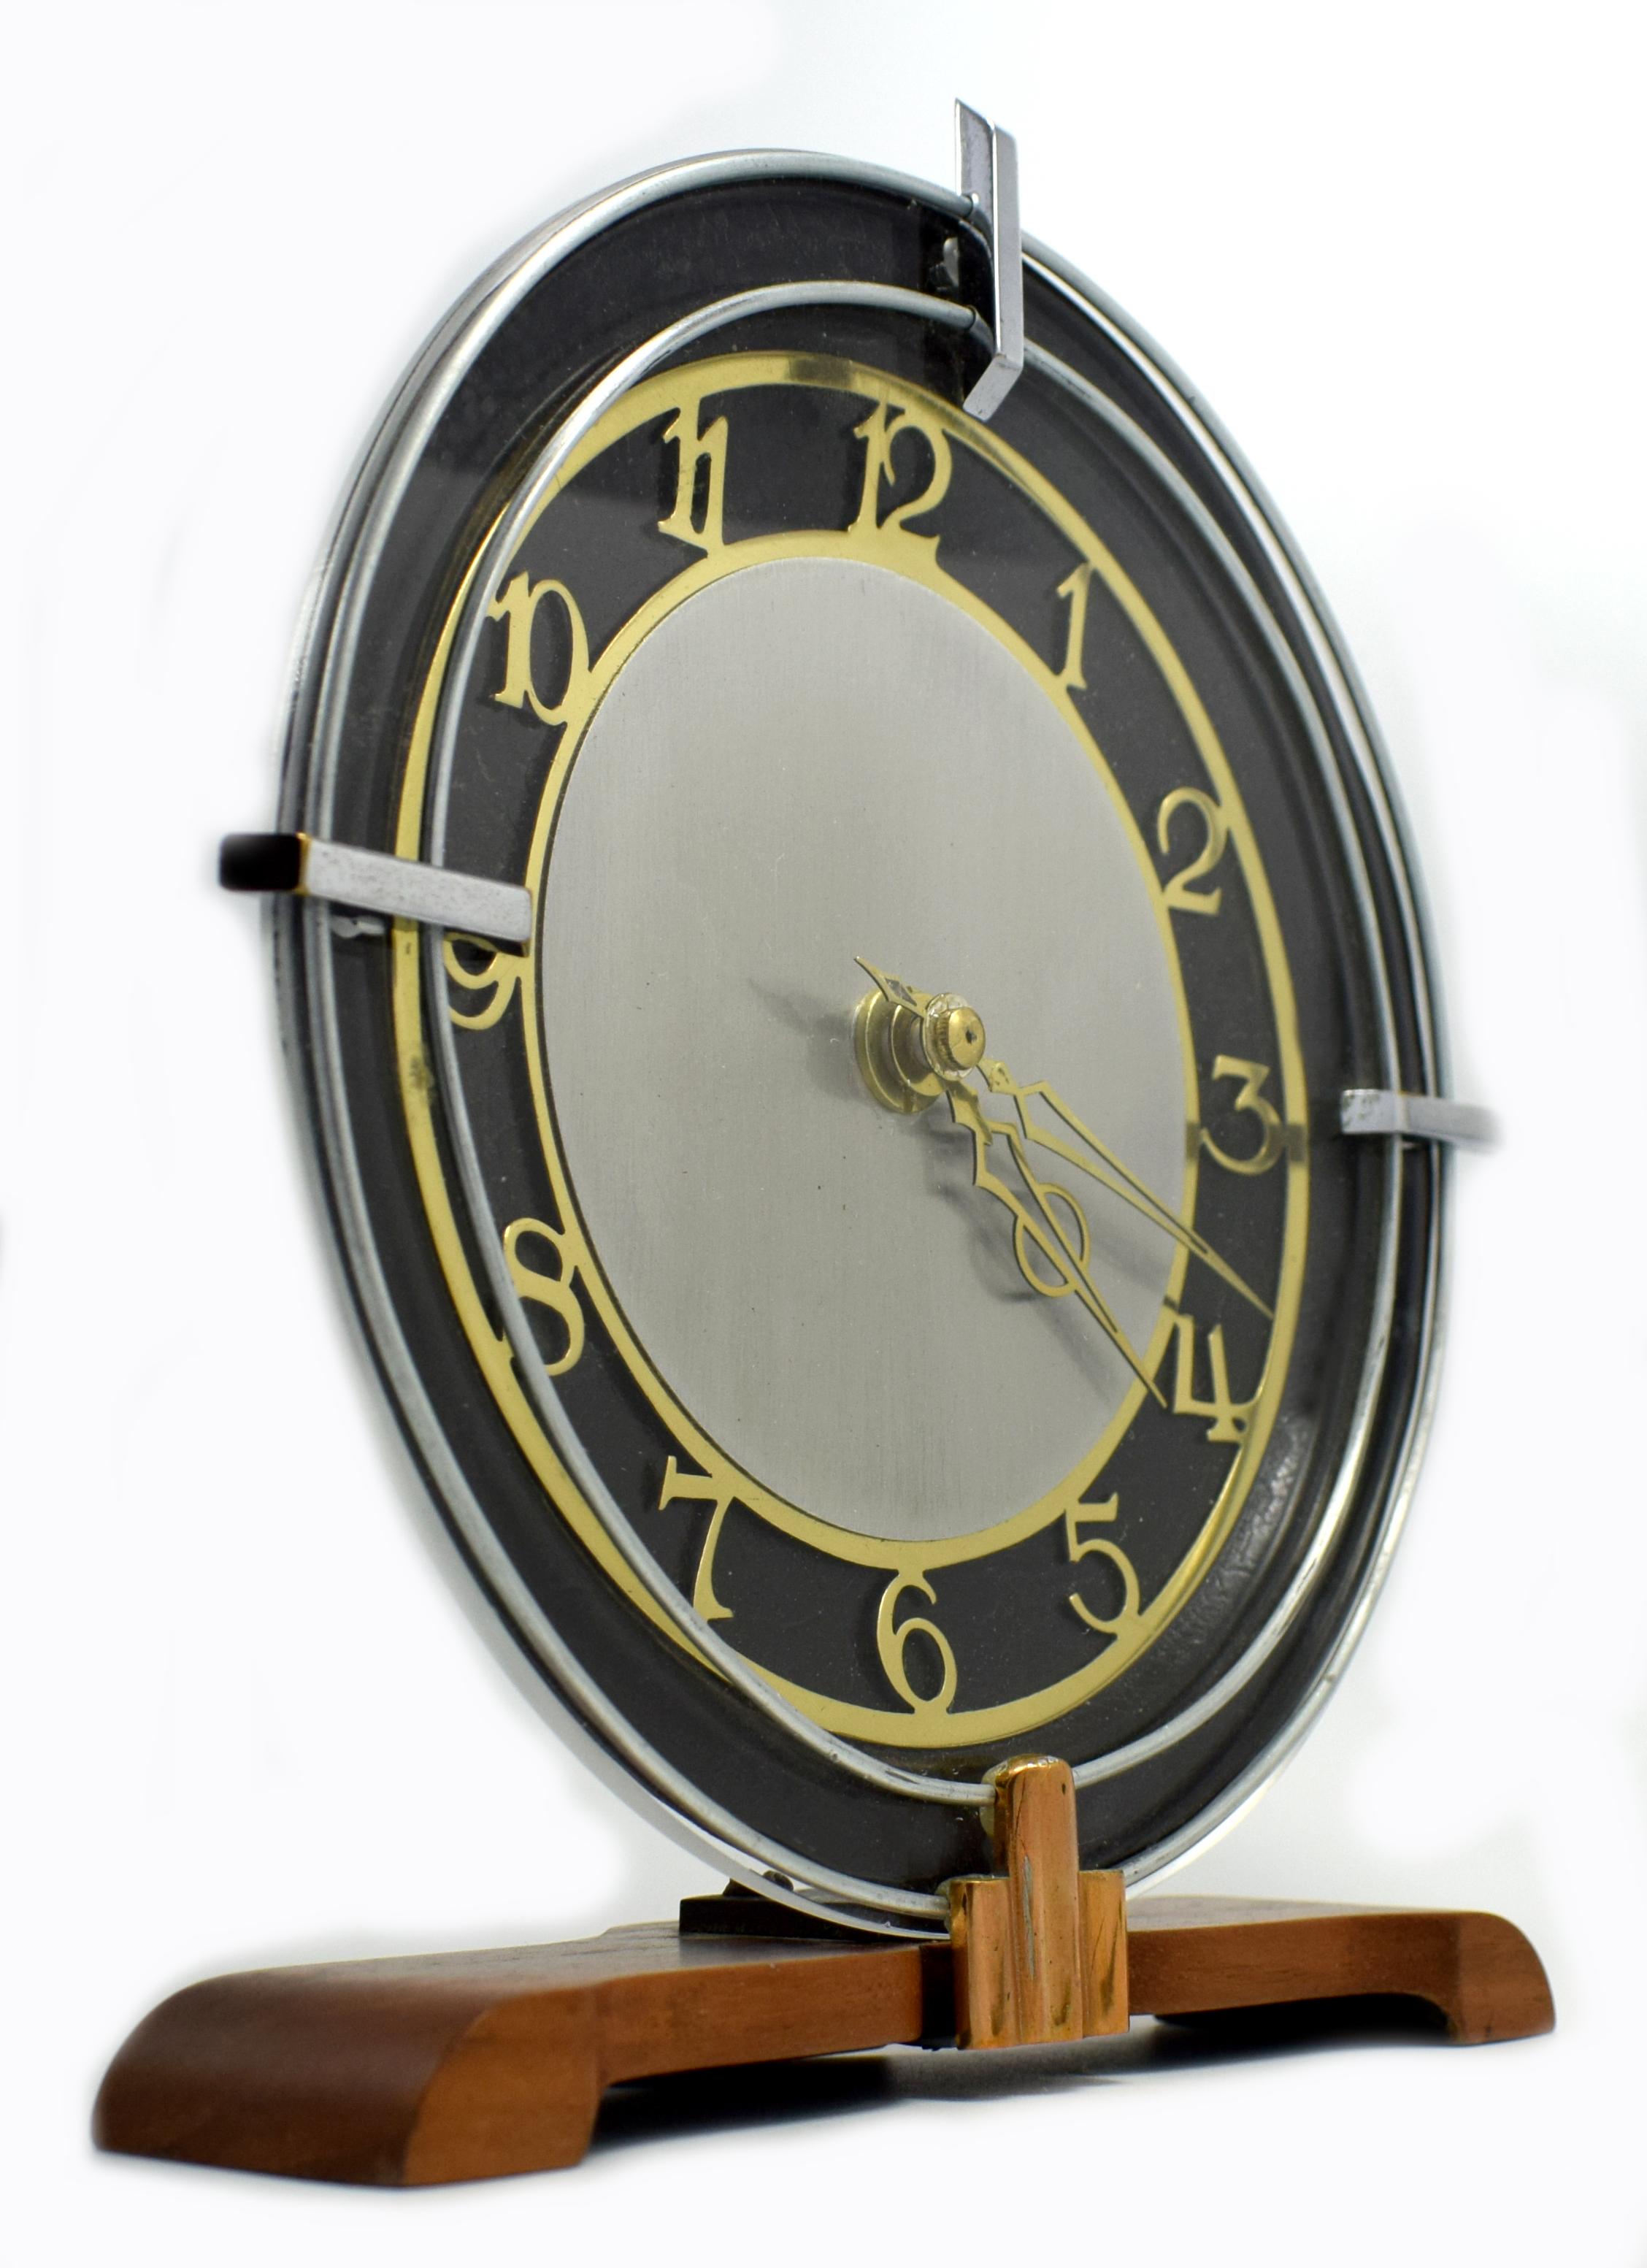 Originating from England and running on a converted quartz battery movement so will work on all continents so no winding required. This Art Deco clock has a mix of materials, from a beechwood base, ebonized accents, brass fretted numerals and chrome